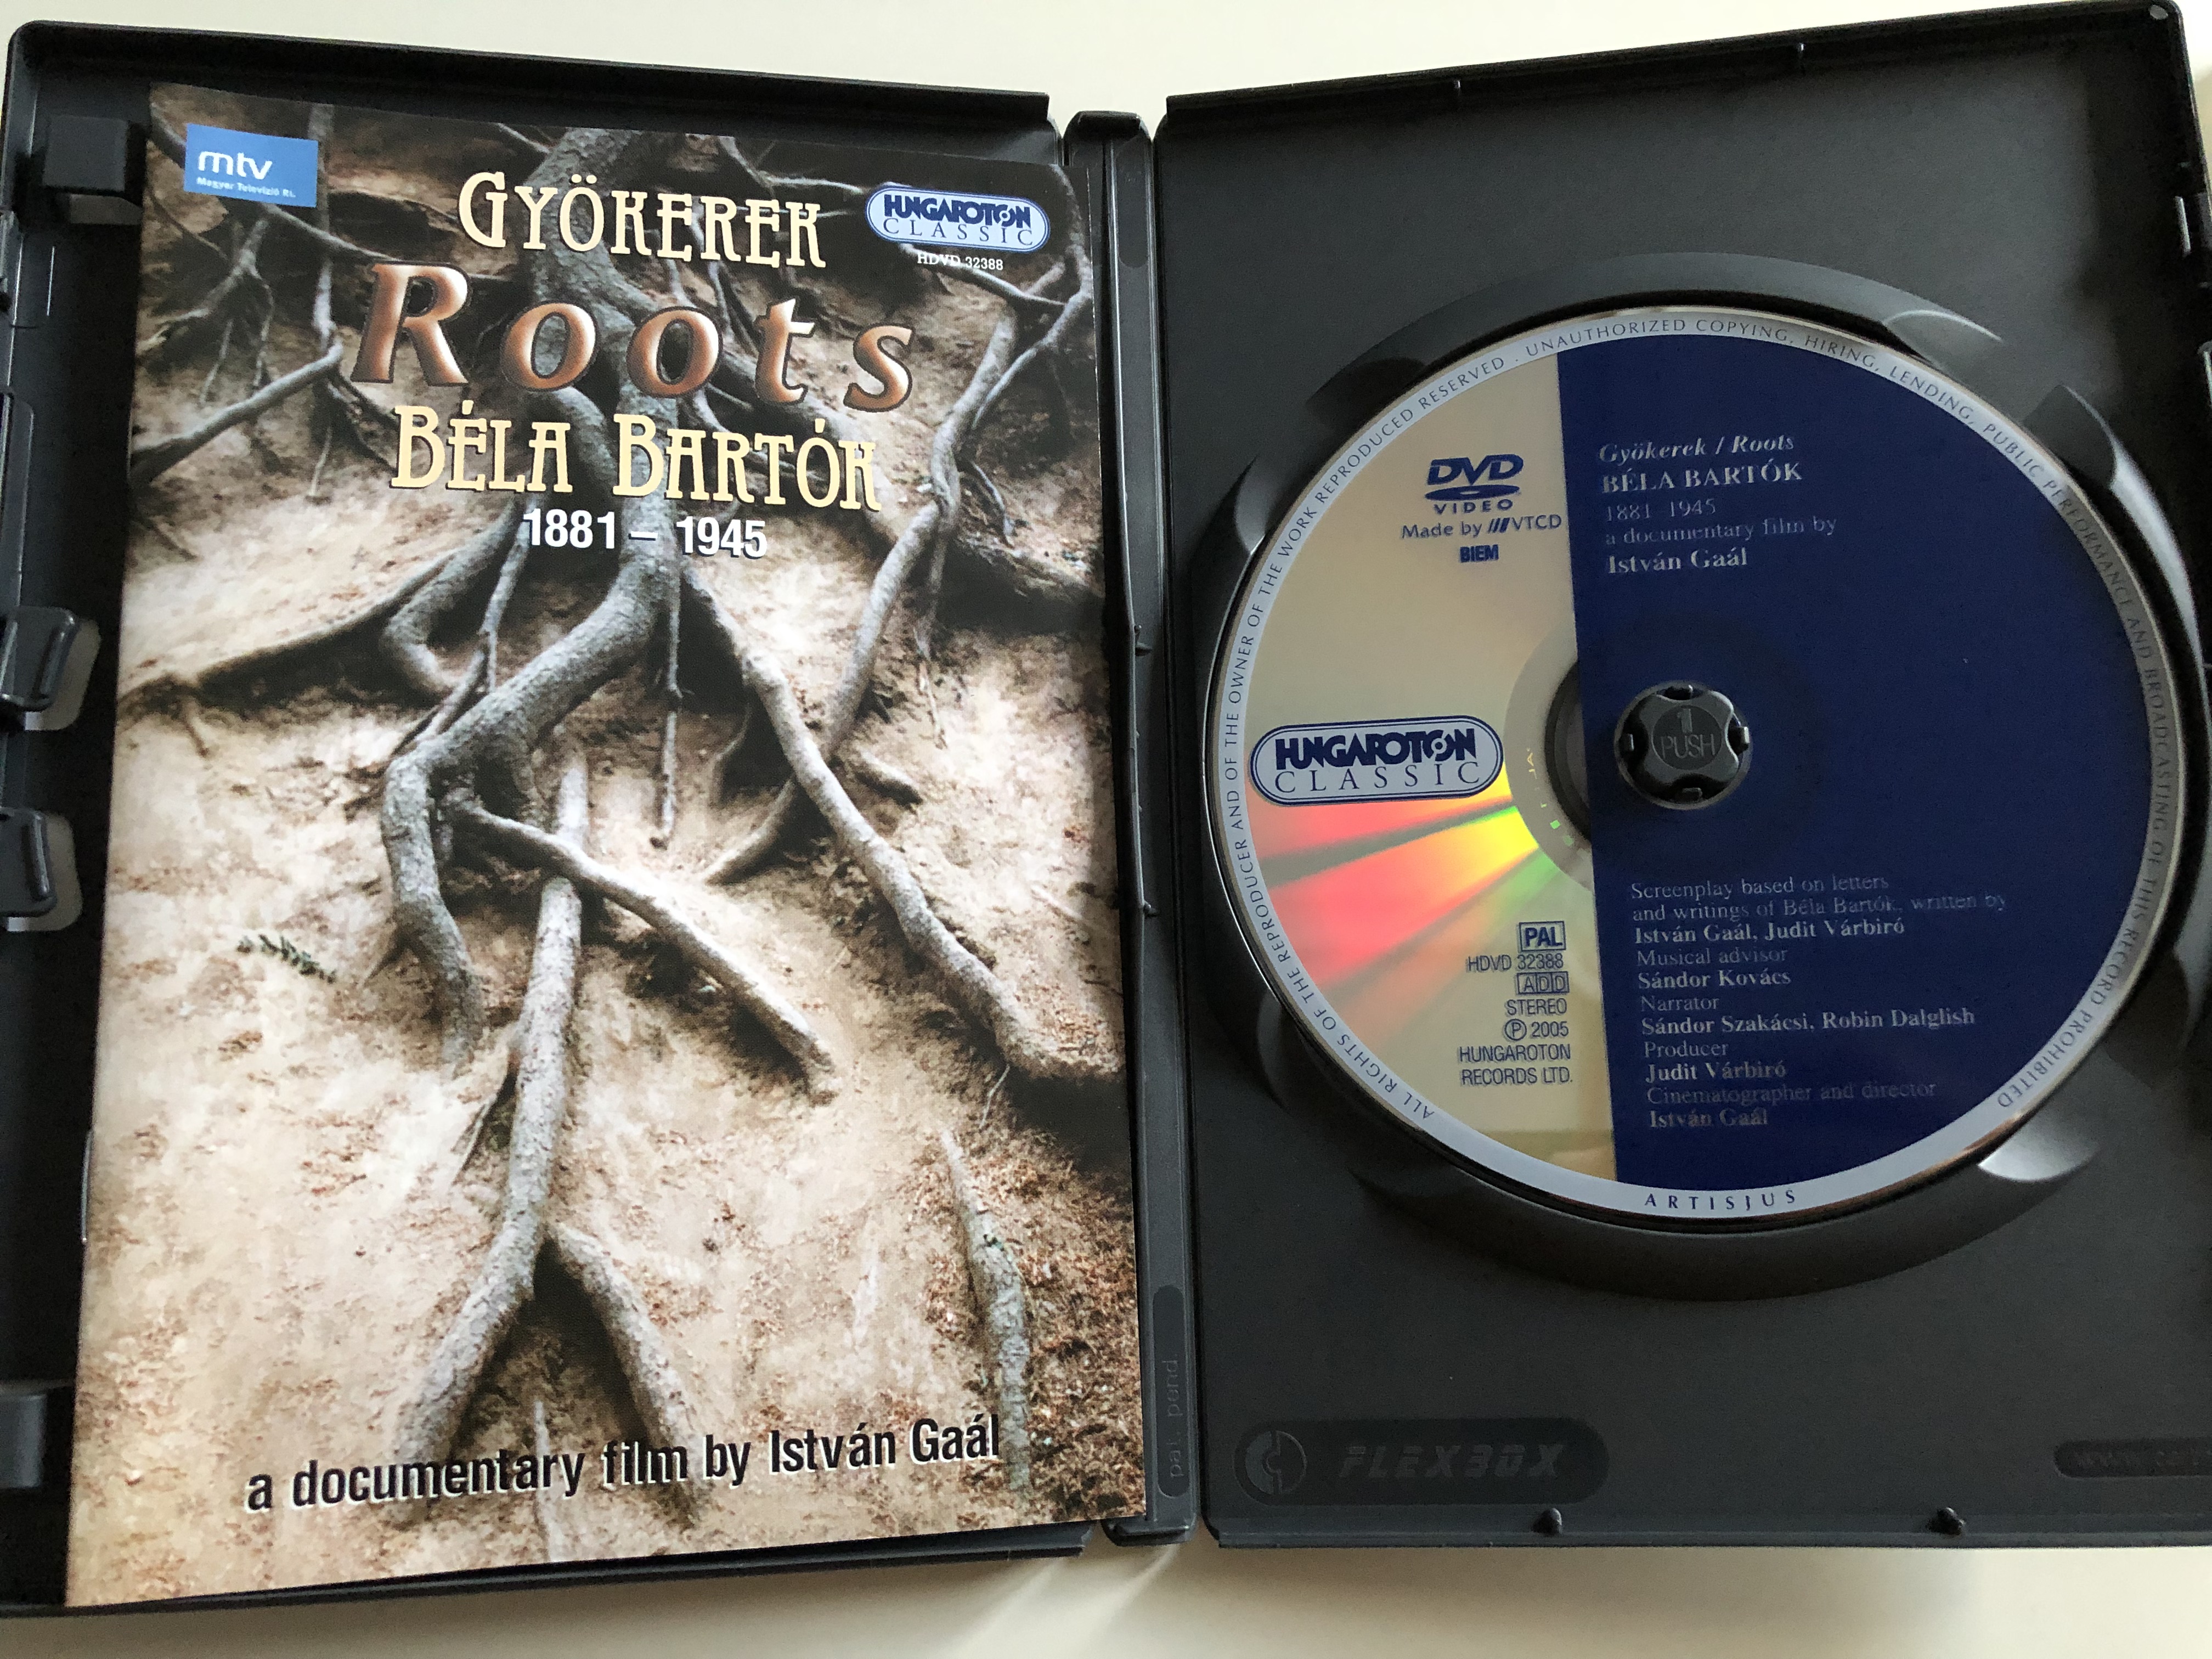 gy-kerek-roots-dvd-2005-b-la-bart-k-a-documentary-film-by-istv-n-ga-l-producer-judit-v-rb-r-a-complete-review-of-bart-k-s-personal-and-artistic-development-hungaroton-classic-hdvd-32388-4-.jpg